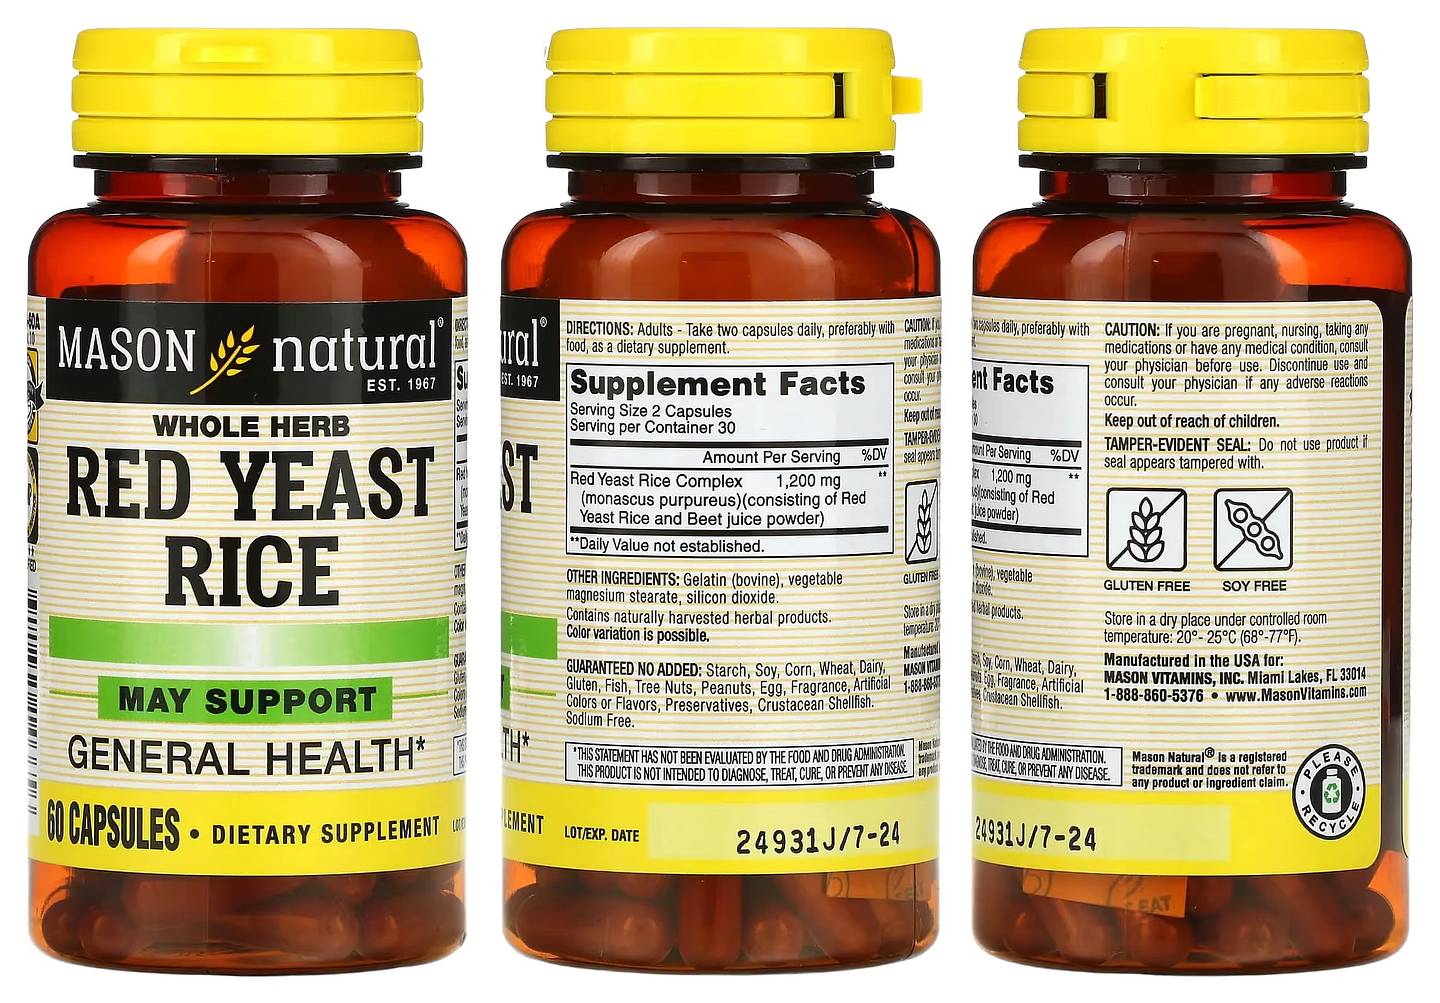 Mason Natural, Whole Herb Red Yeast Rice packaging